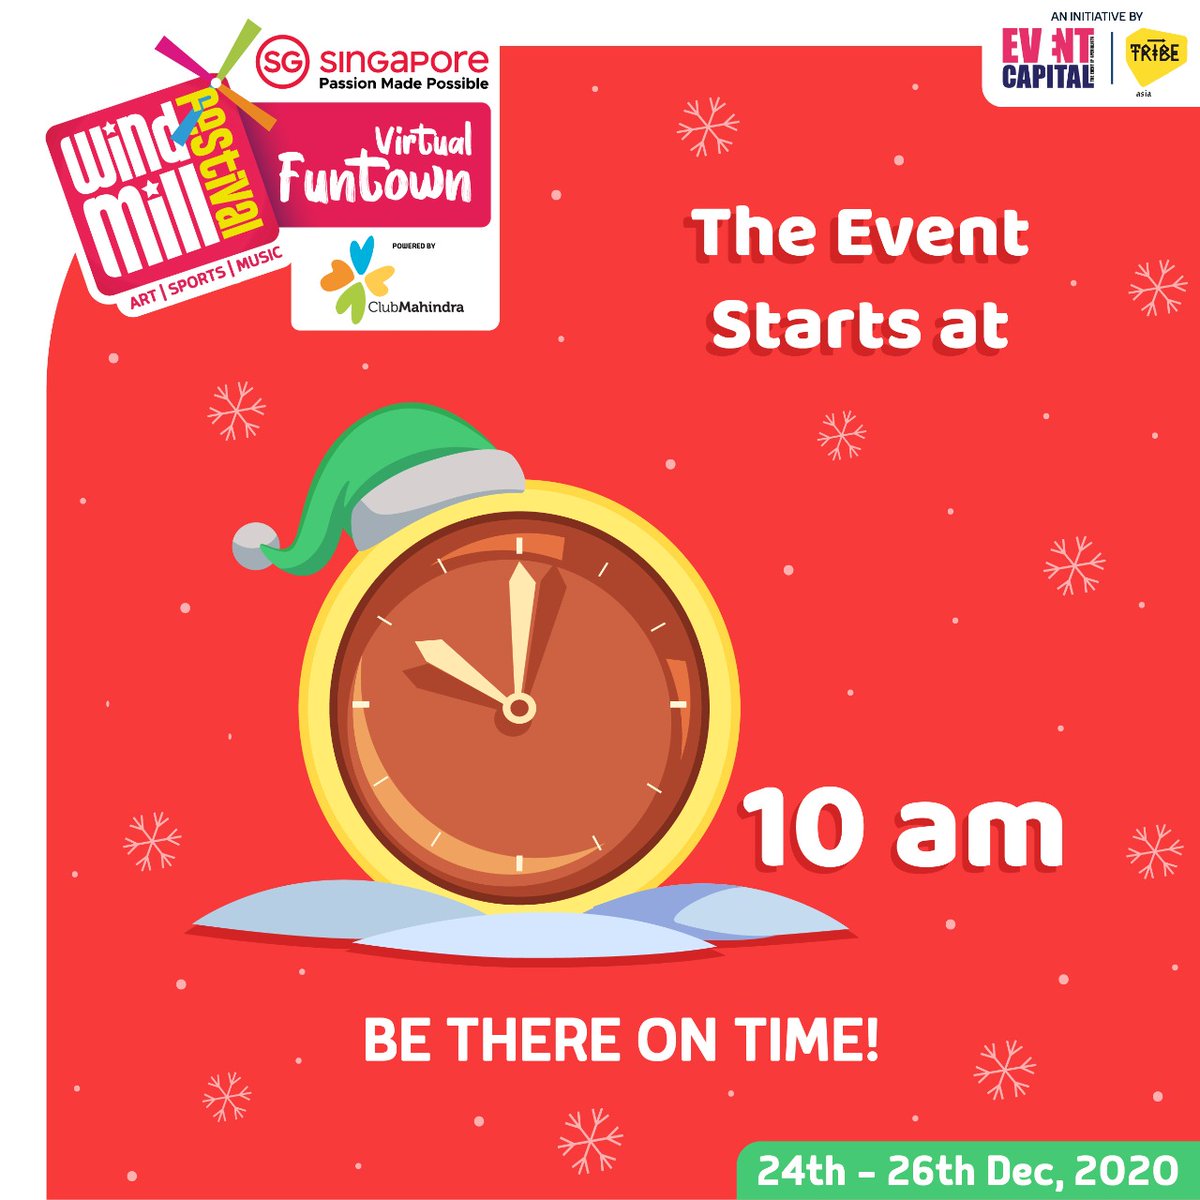 The clock is ticking. The biggest Christmas celebration begins tomorrow at 10 am Register Now for the Windmill Festival Virtual Funtown - Christmas Edition. virtualfuntown.live #windmillfest #letswindmill #windmillchristmas #windmill2020 #kidsfestival #christmas